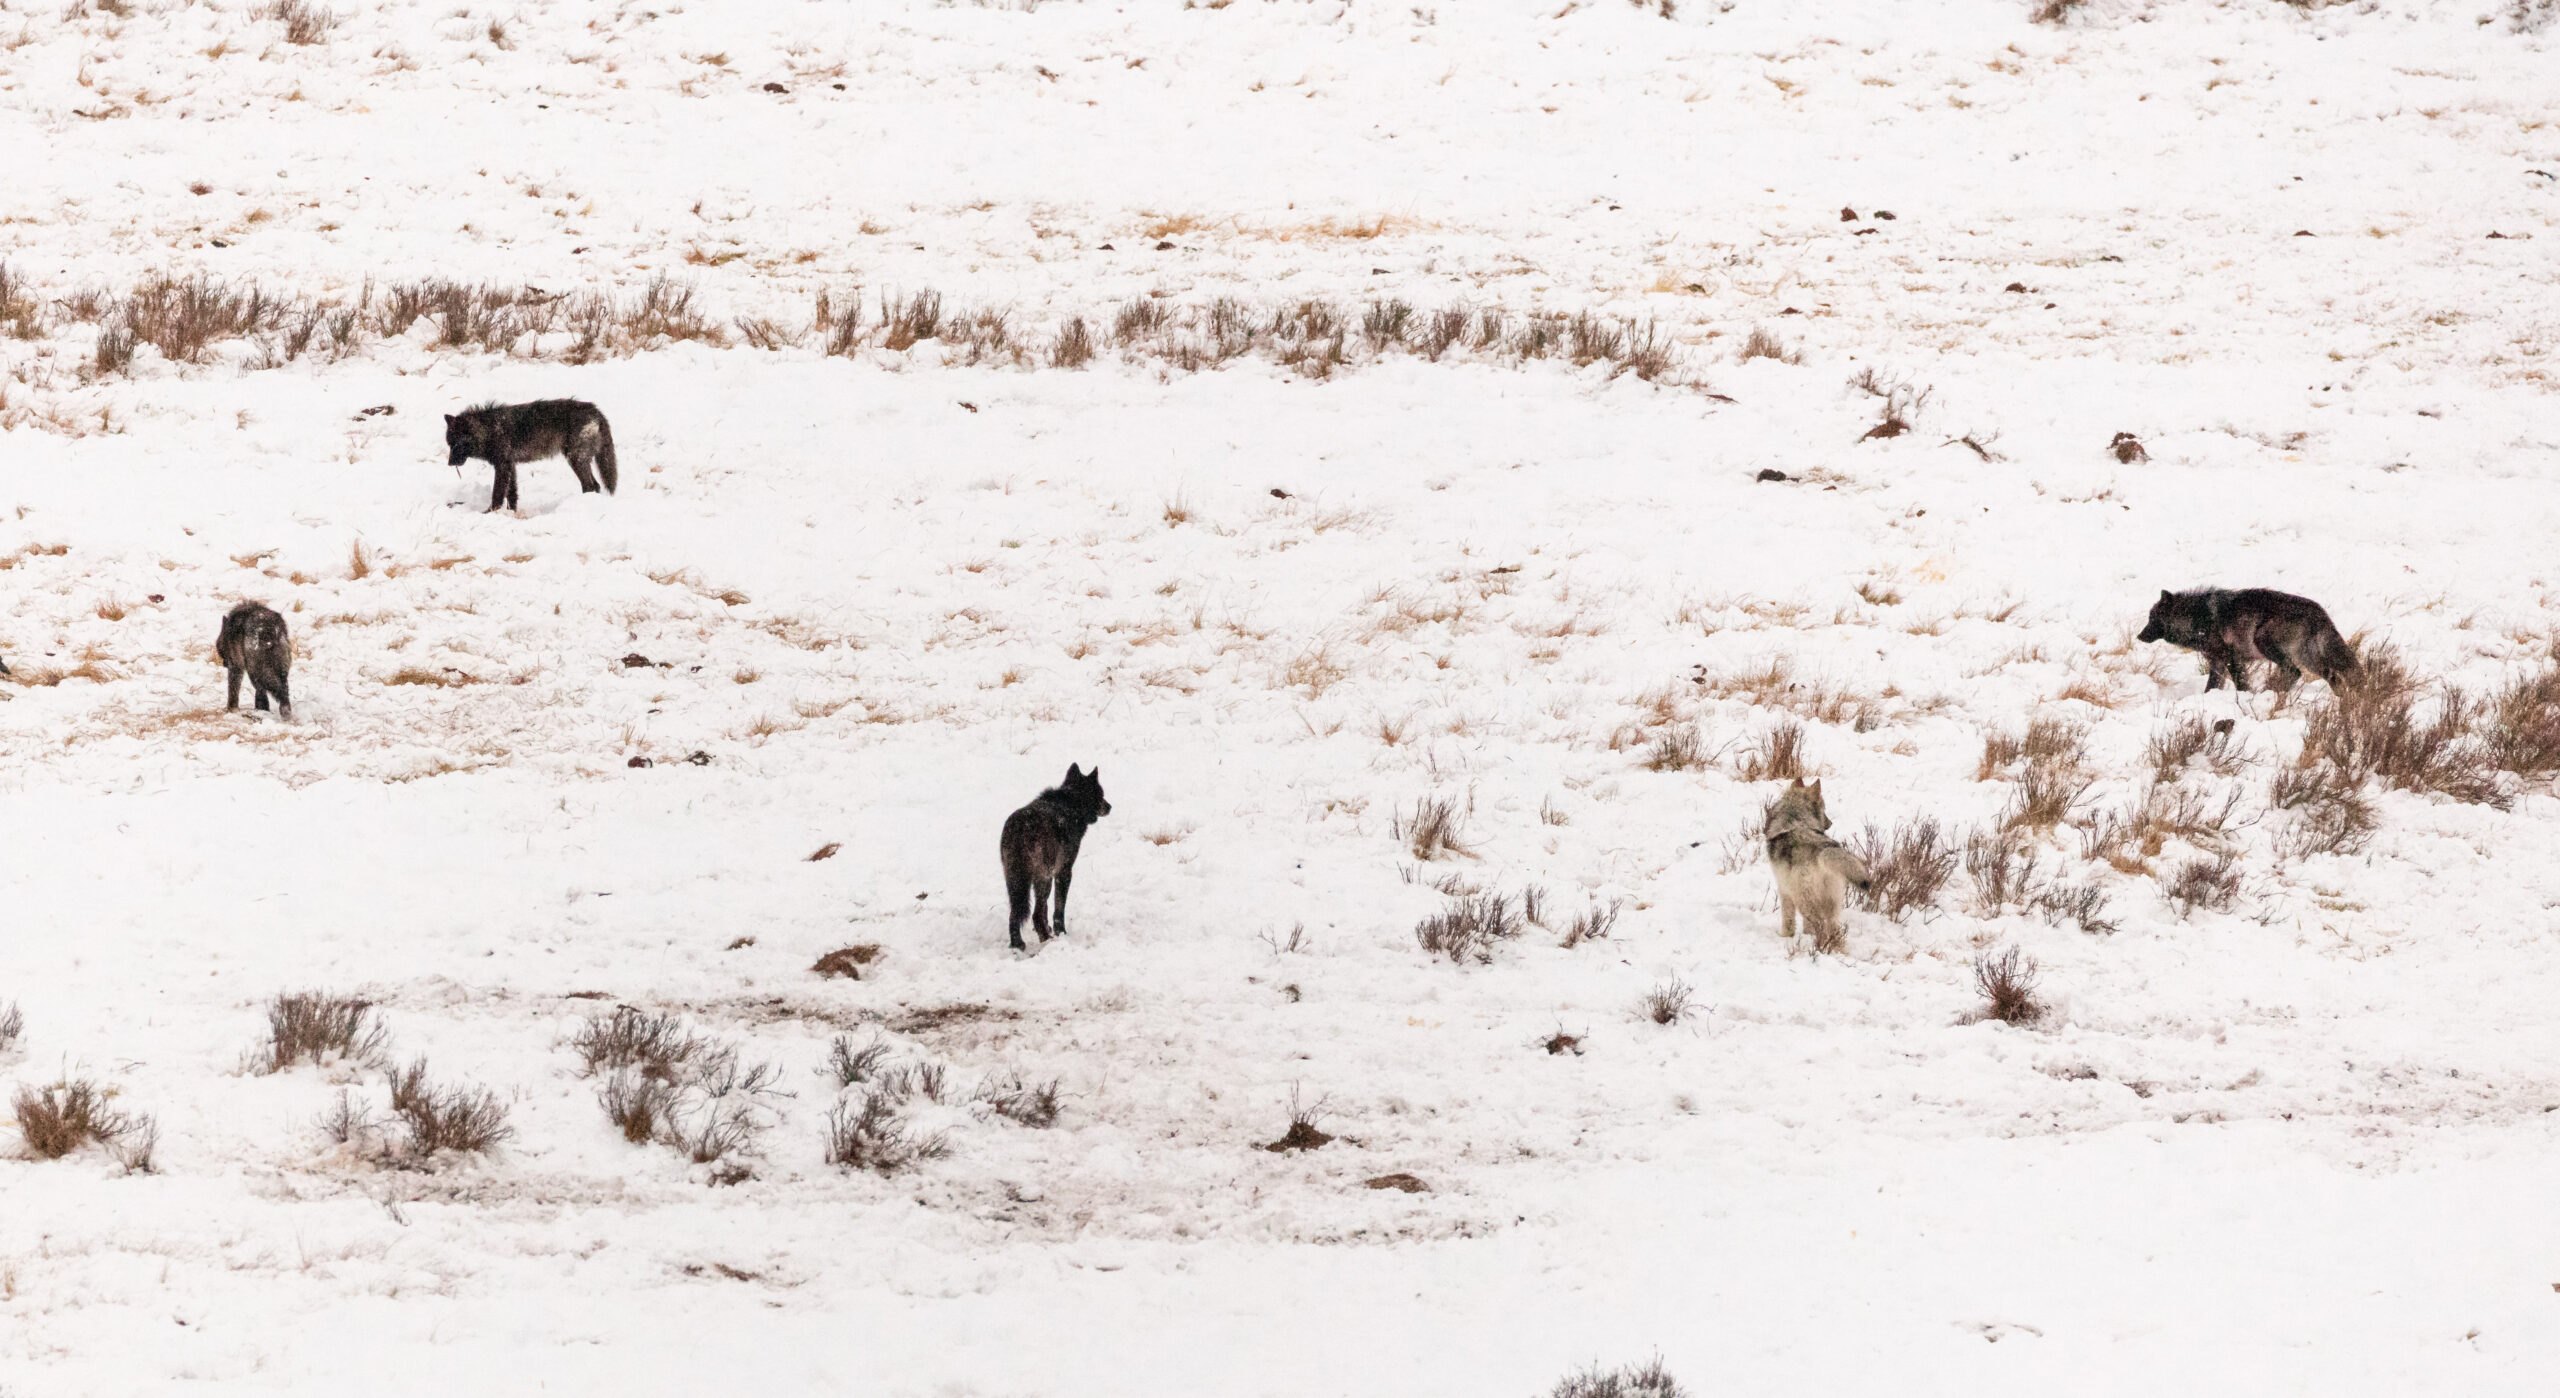 Officials suspect the wolves that have been attacking cattle in northwest Colorado are coming down from Wyoming.